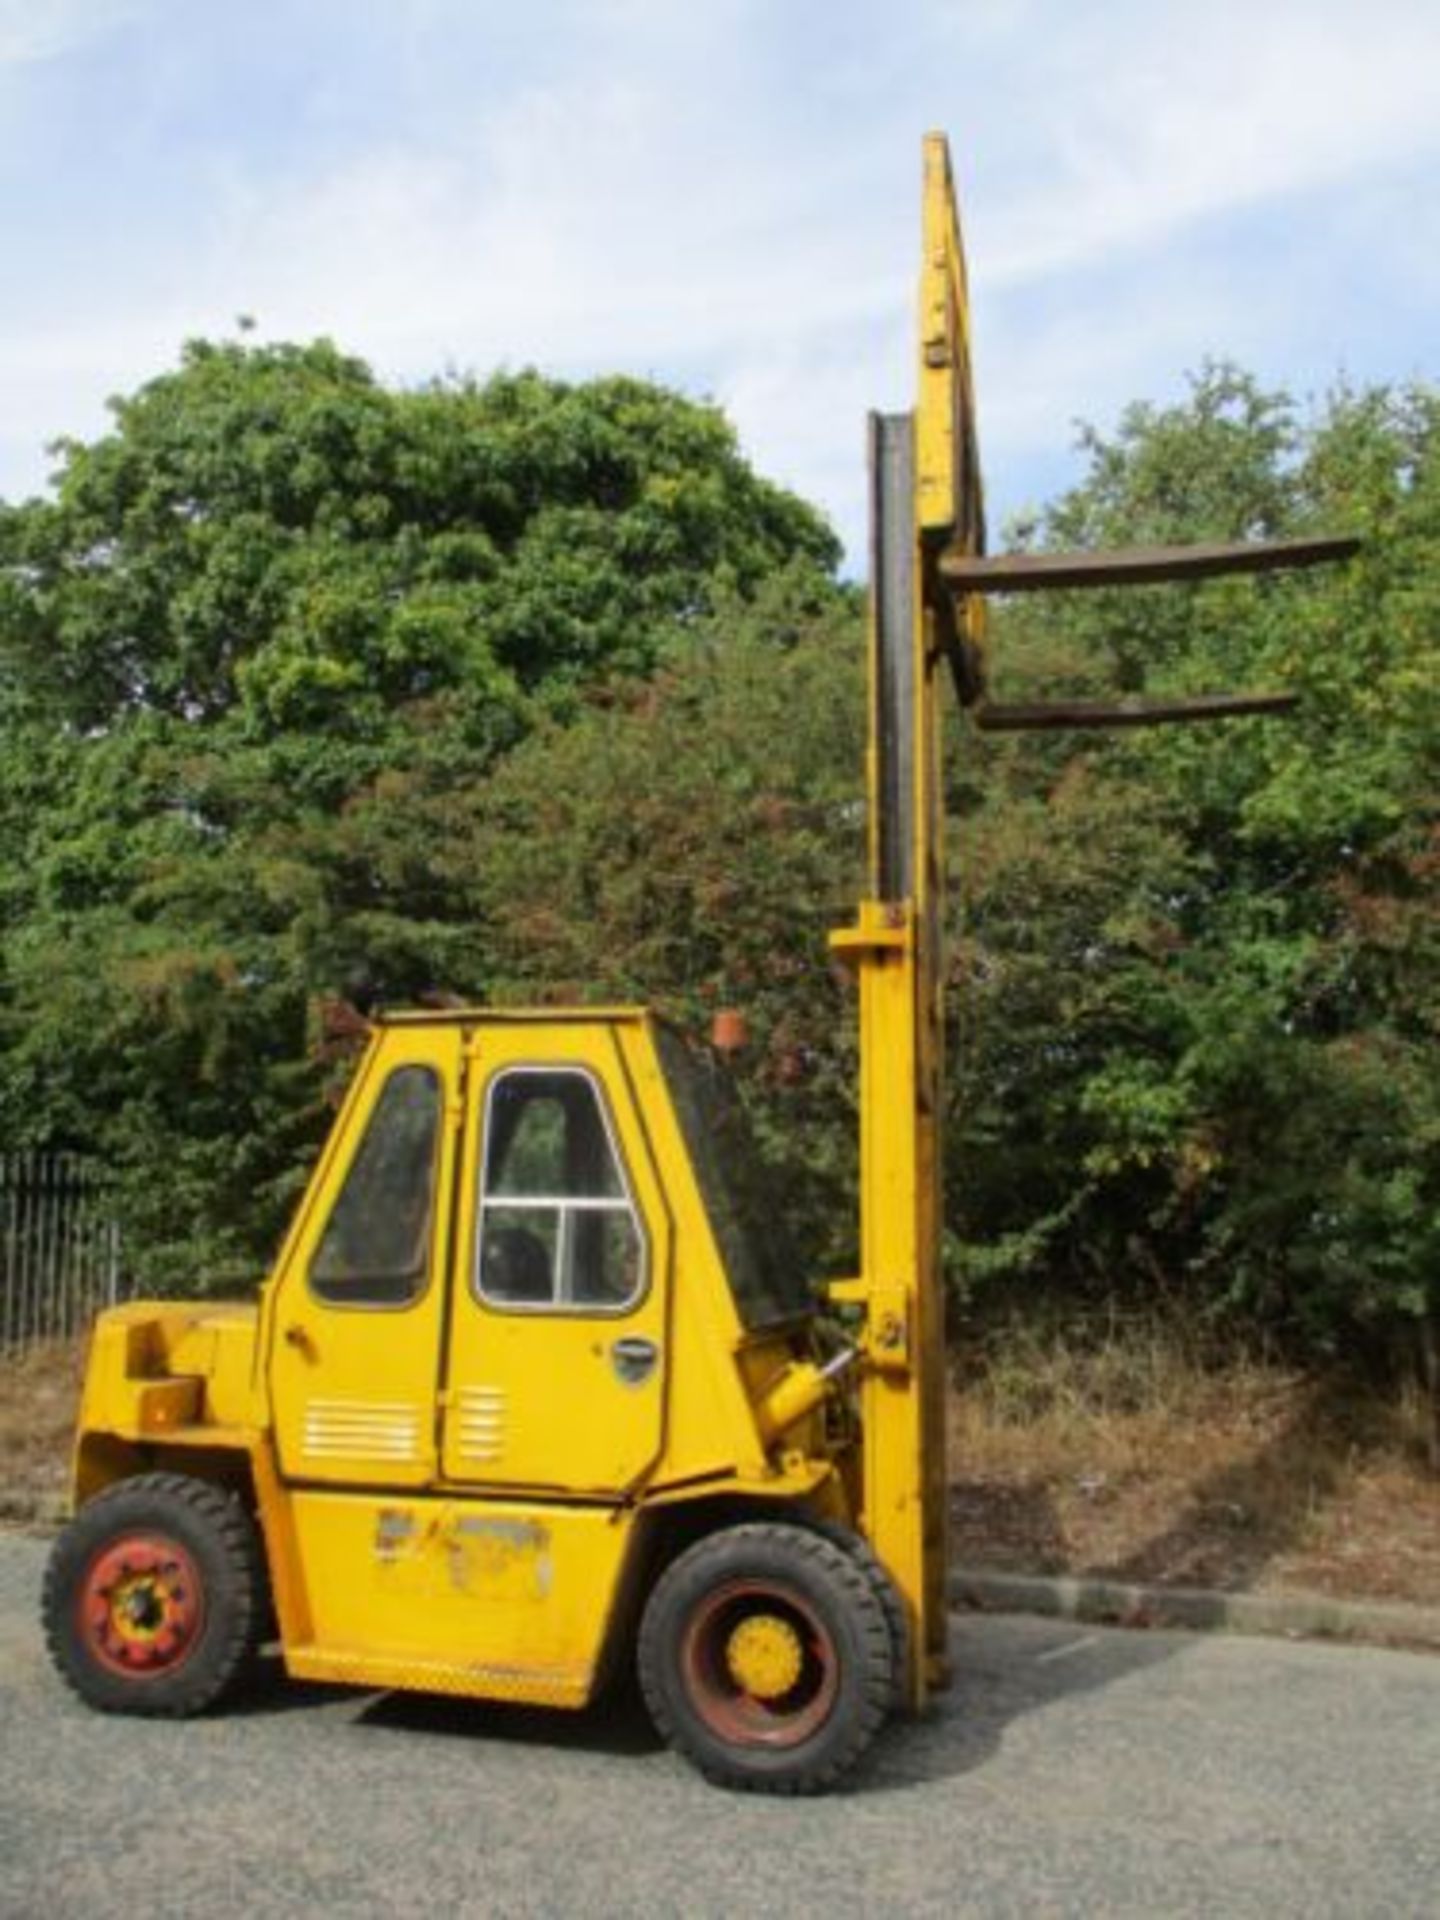 CLIMAX DA50 FORK LIFT FORKLIFT TRUCK STACKER 5 TON LIFT 6 7 8 10 DELIVERY - Image 4 of 12